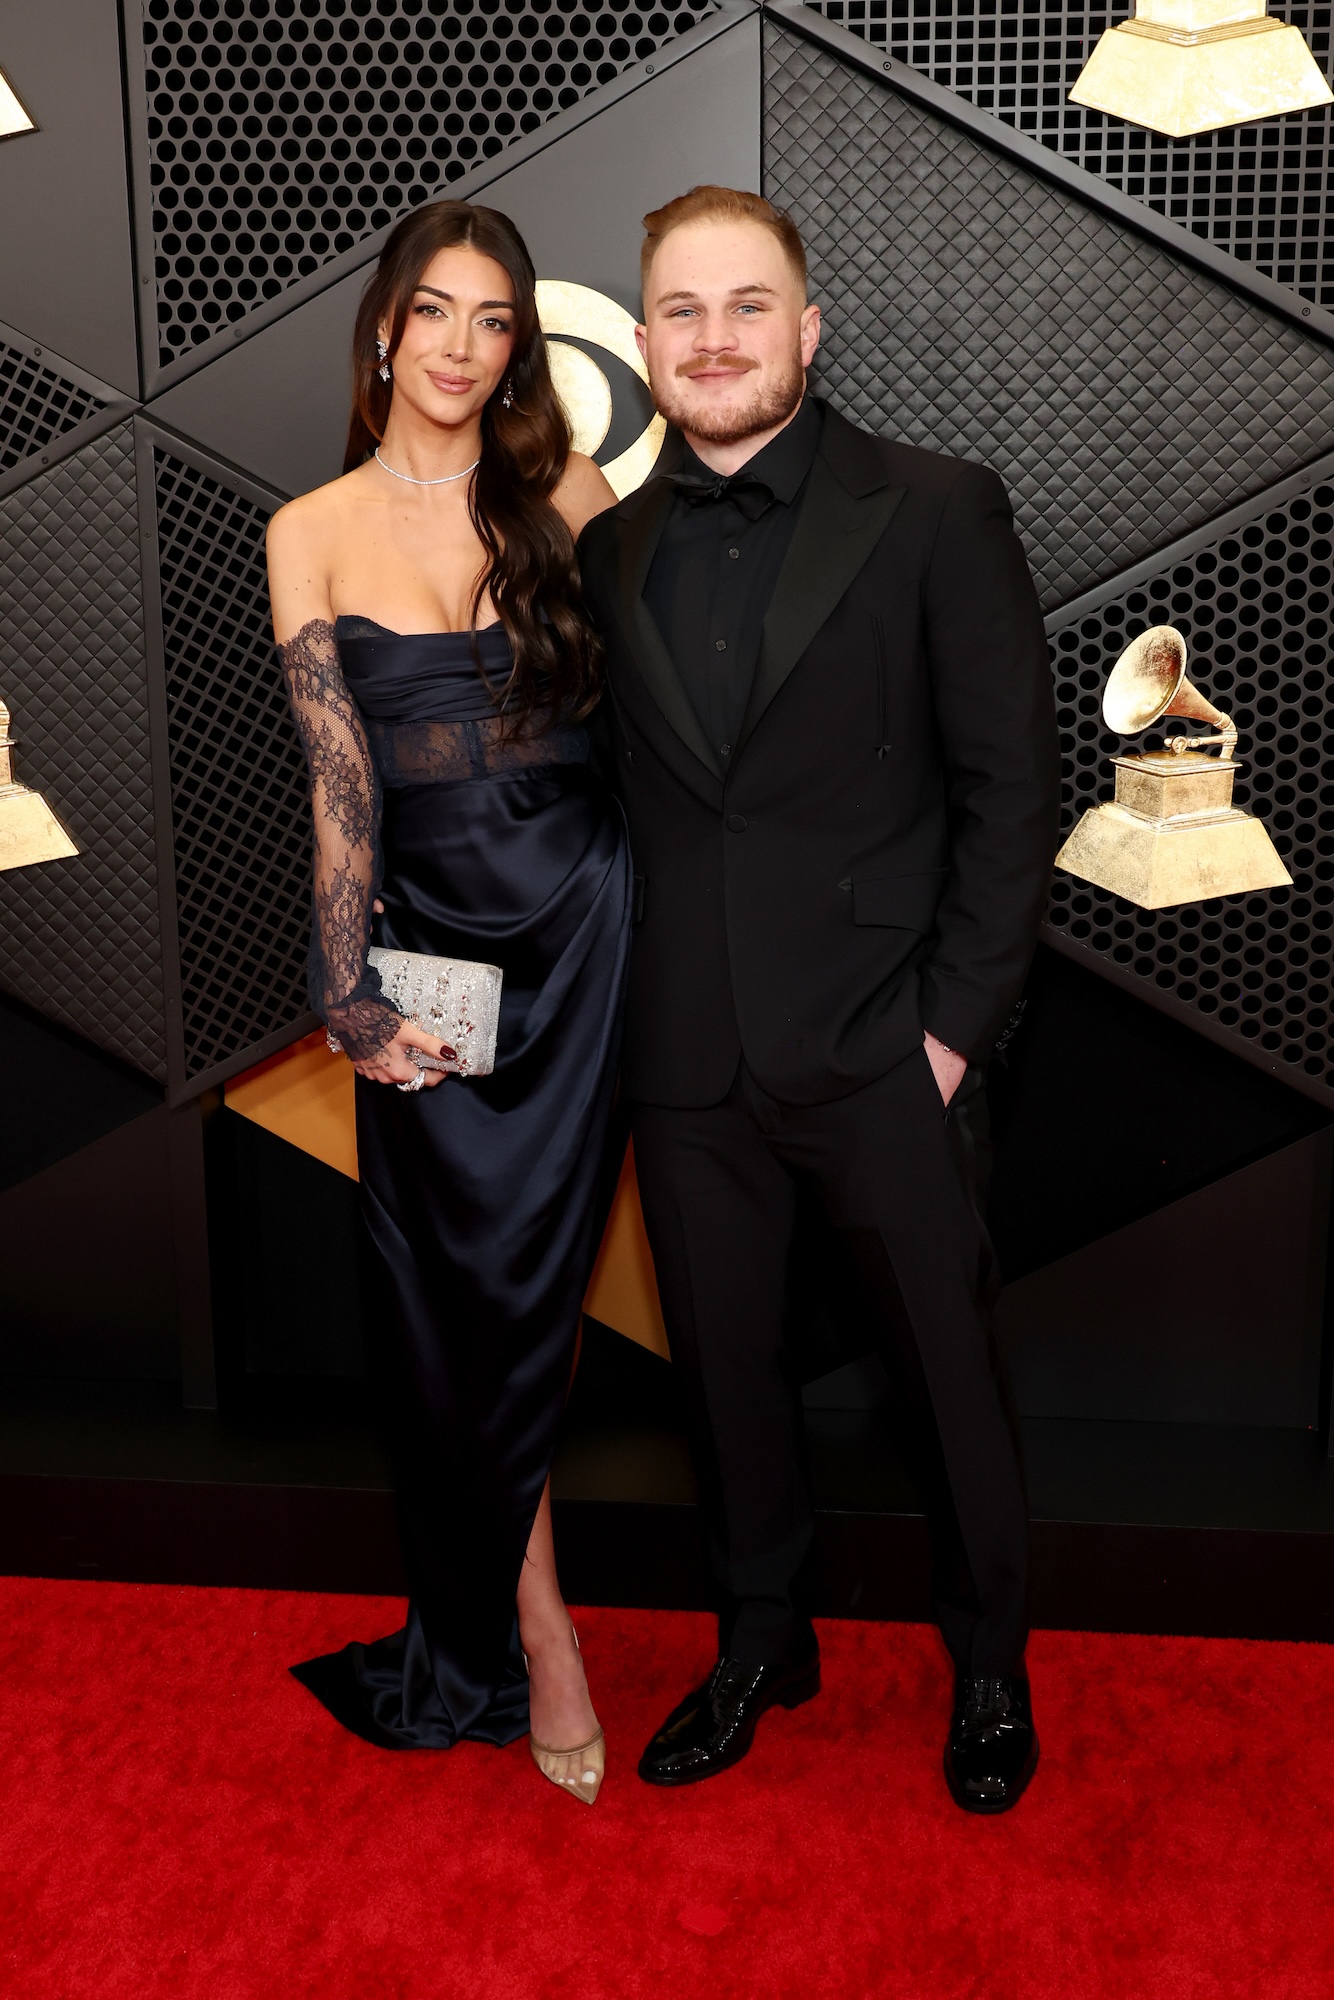 GettyImages-1986111788-Brianna LaPaglia and Zach Bryan at GRAMMY Awards